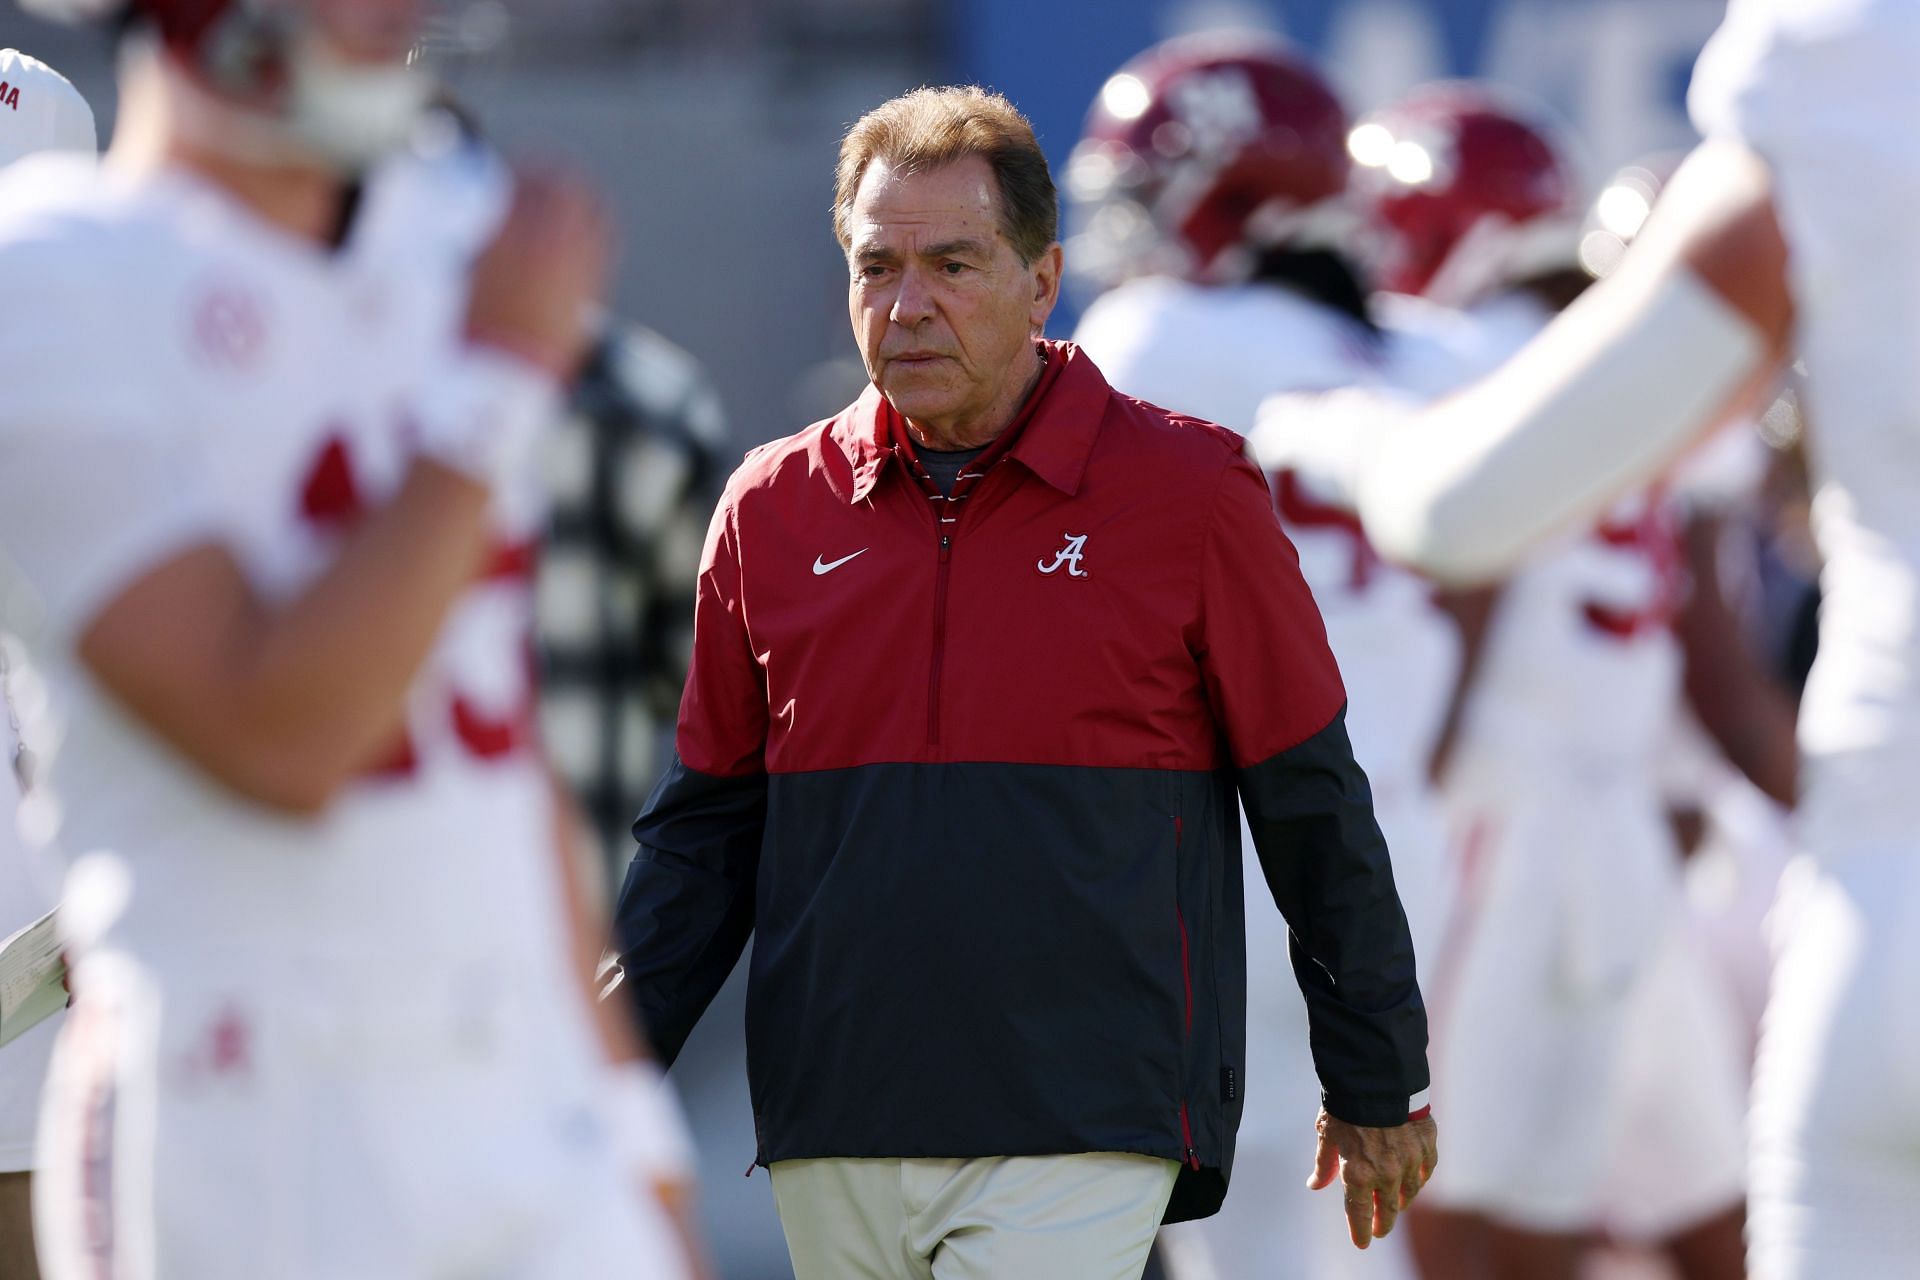 PASADENA, CALIFORNIA - JANUARY 01: Head coach Nick Saban of the Alabama Crimson Tide before the CFP Semifinal Rose Bowl Game against the Michigan Wolverines at Rose Bowl Stadium on January 01, 2024 in Pasadena, California. (Photo by Harry How/Getty Images)